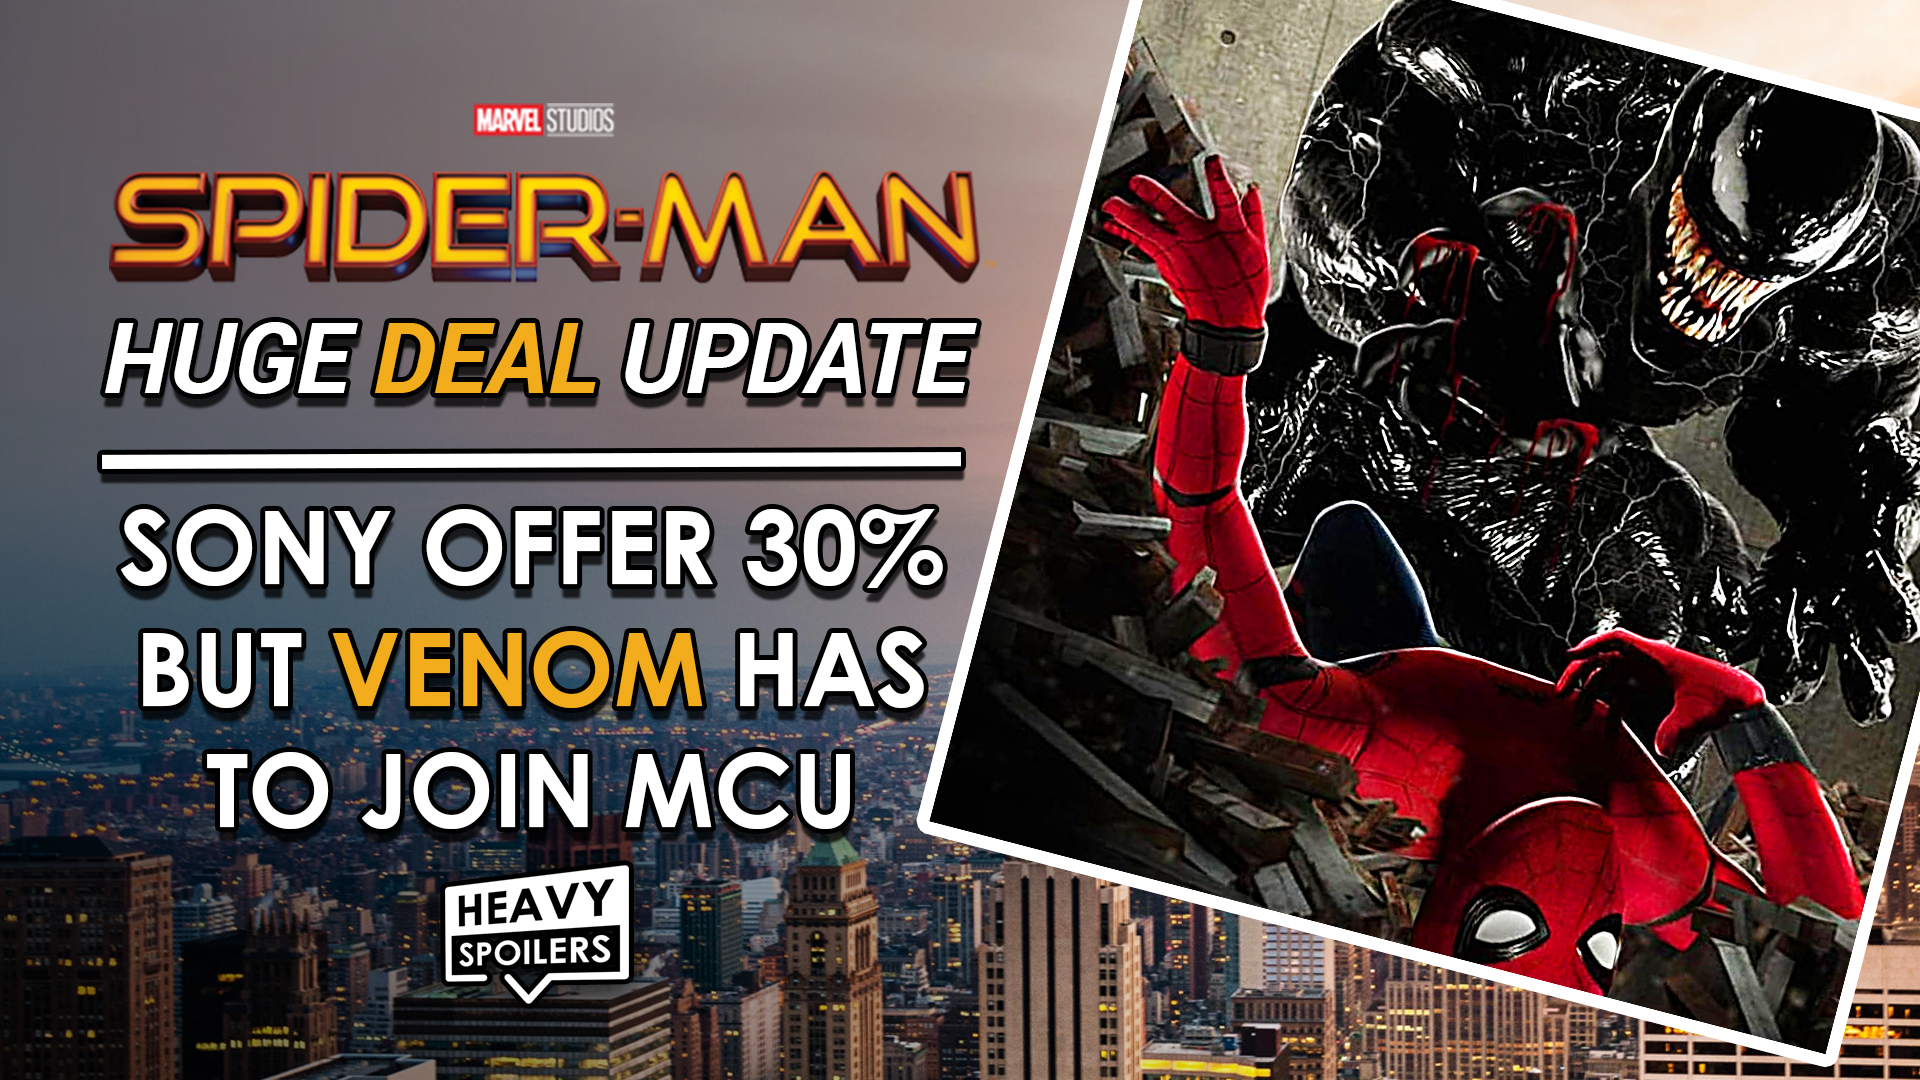 spiderman back in the mcu as sony offer disney 30% for venom and tom holland spider man full deal update breakdown and spider verse cross over confirmed